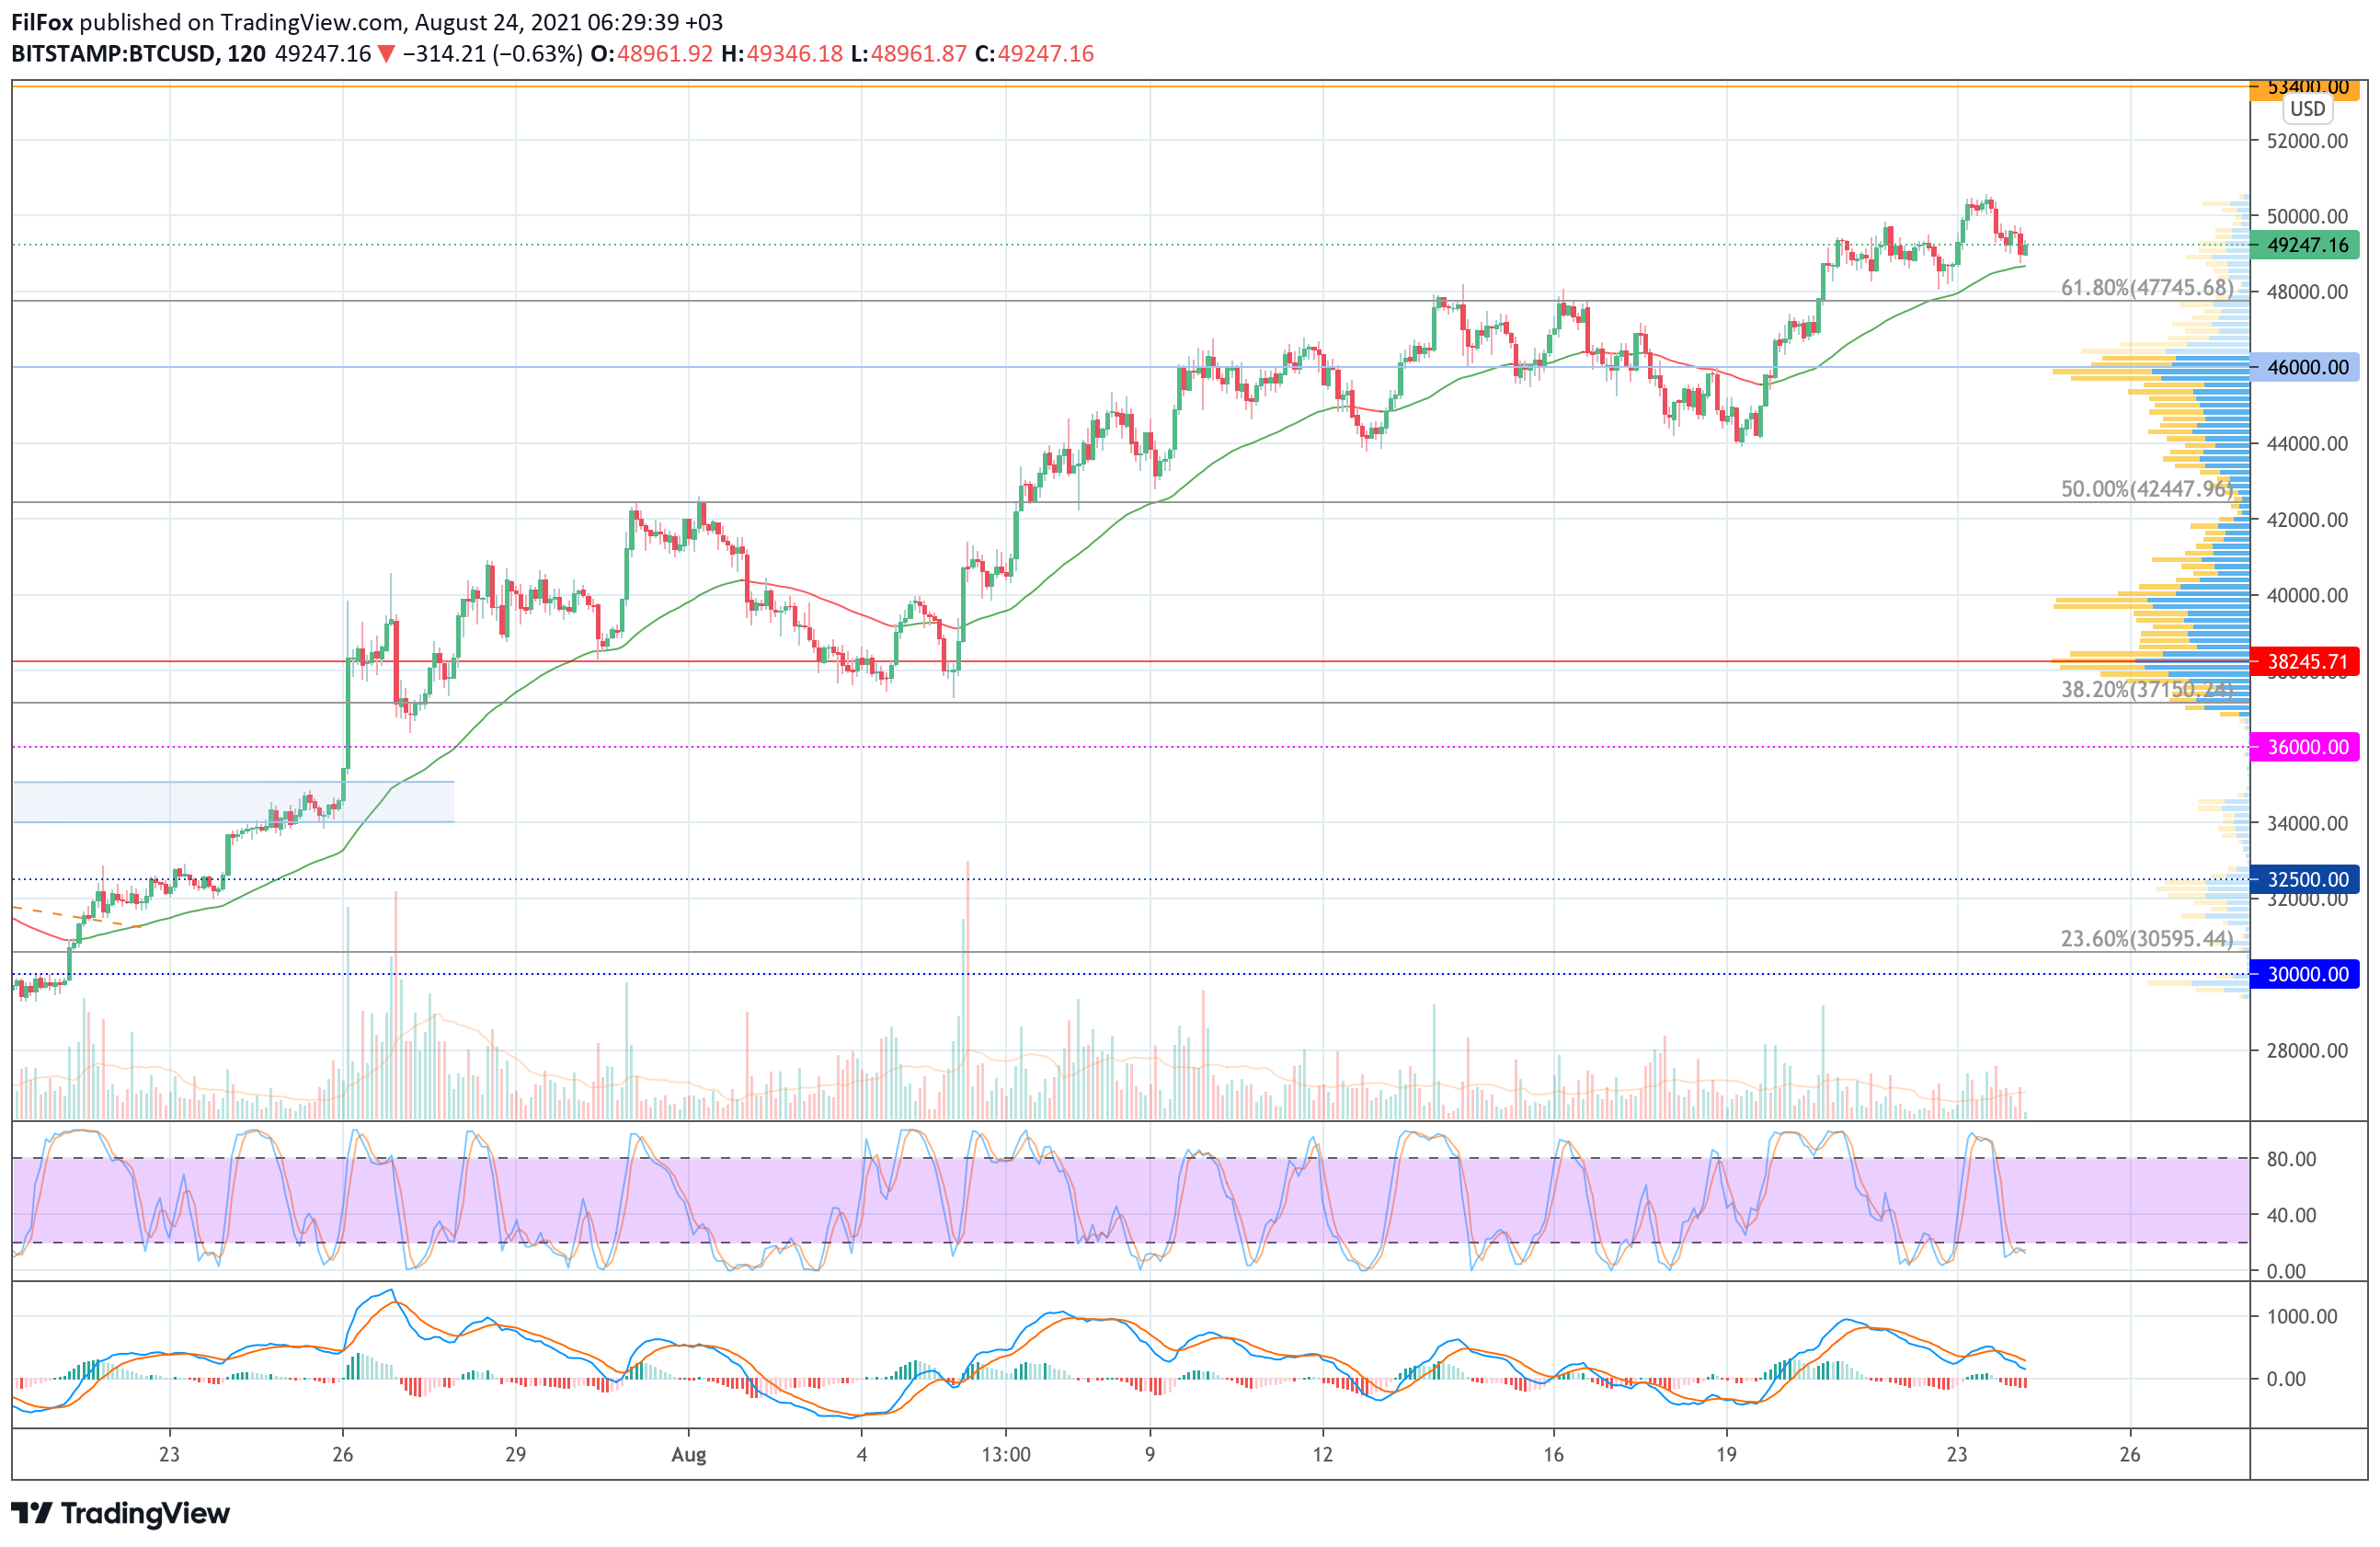 Analysis of prices for Bitcoin, Ethereum, XRP for 08/24/2021